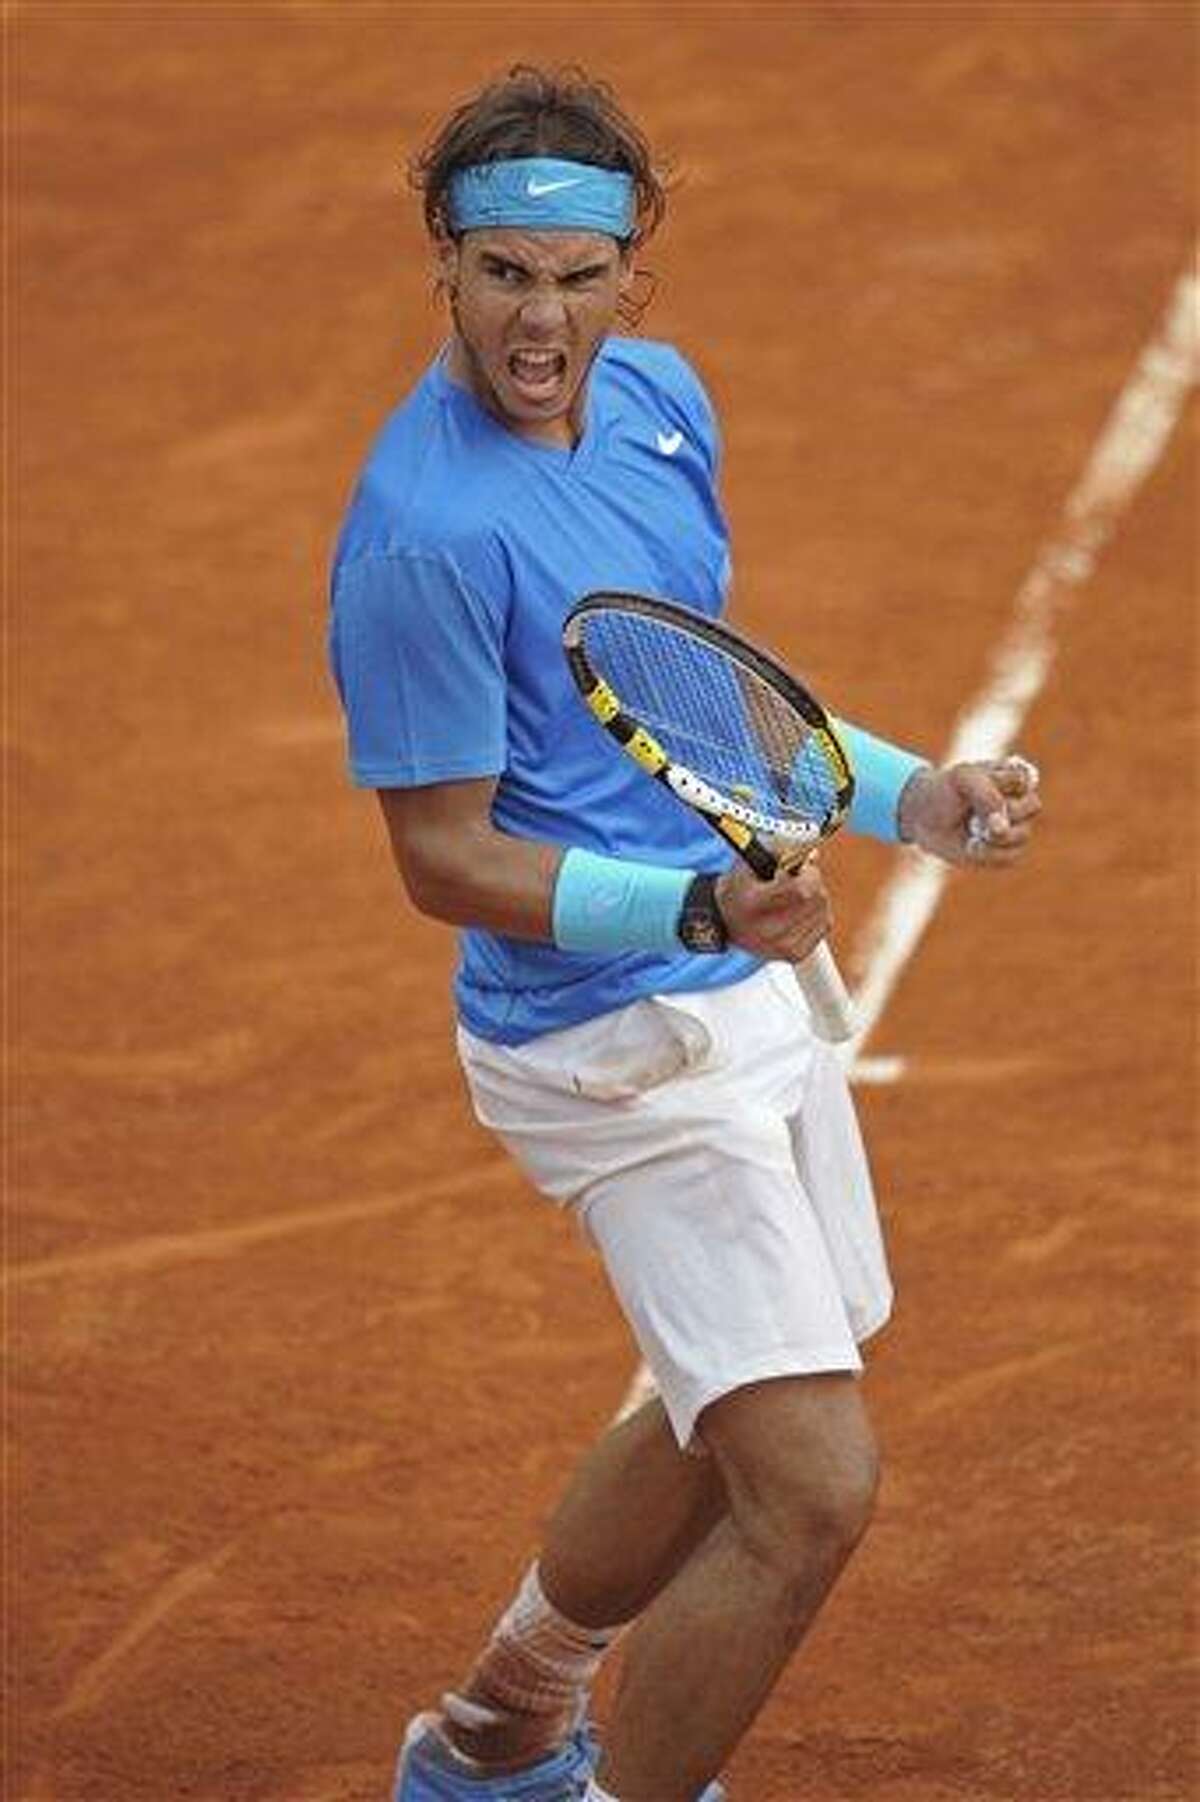 Rafael Nadal of Spain clenches his fist as he takes the second set in his match against Roger Federer of Switzerland in the men's final of the French Open tennis tournament in Roland Garros stadium in Paris, Sunday. (AP Photo/Laurent Baheux)